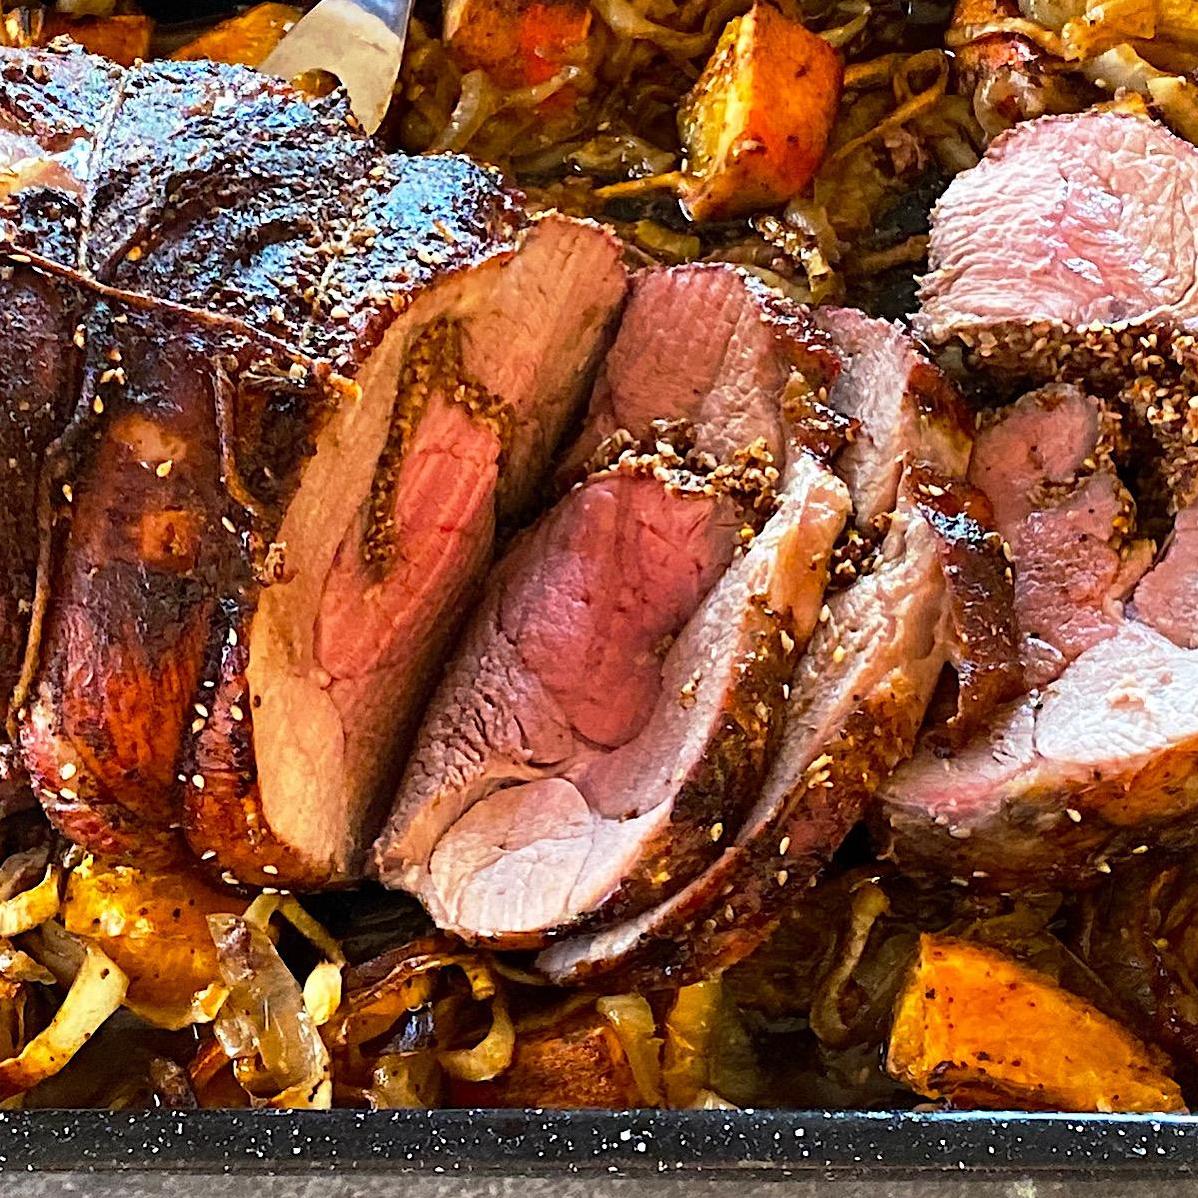  The crackling sounds of the lamb will have your mouth watering